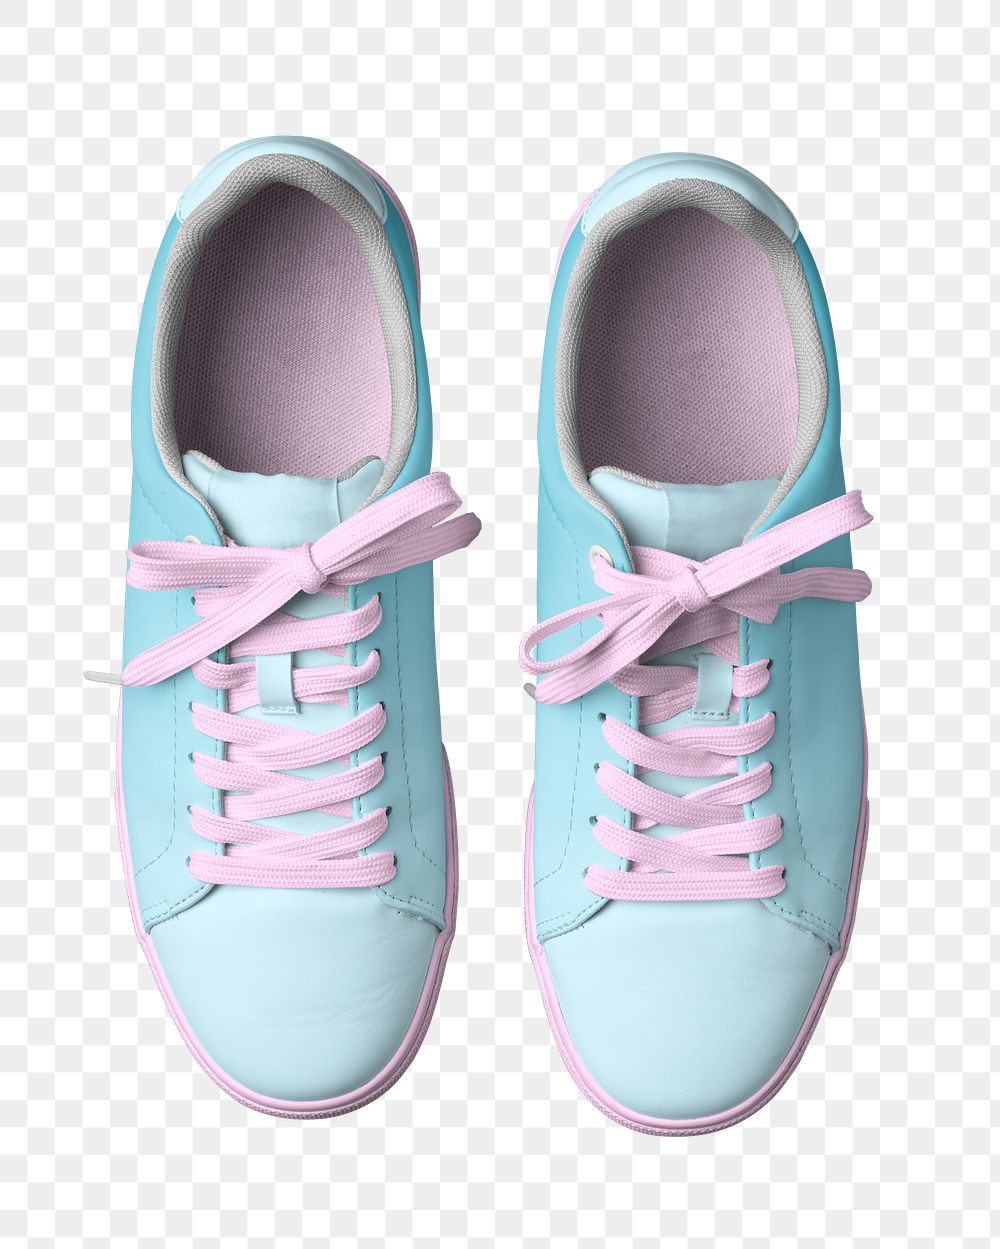 Pastel sneakers png pink shoelaces, transparent background